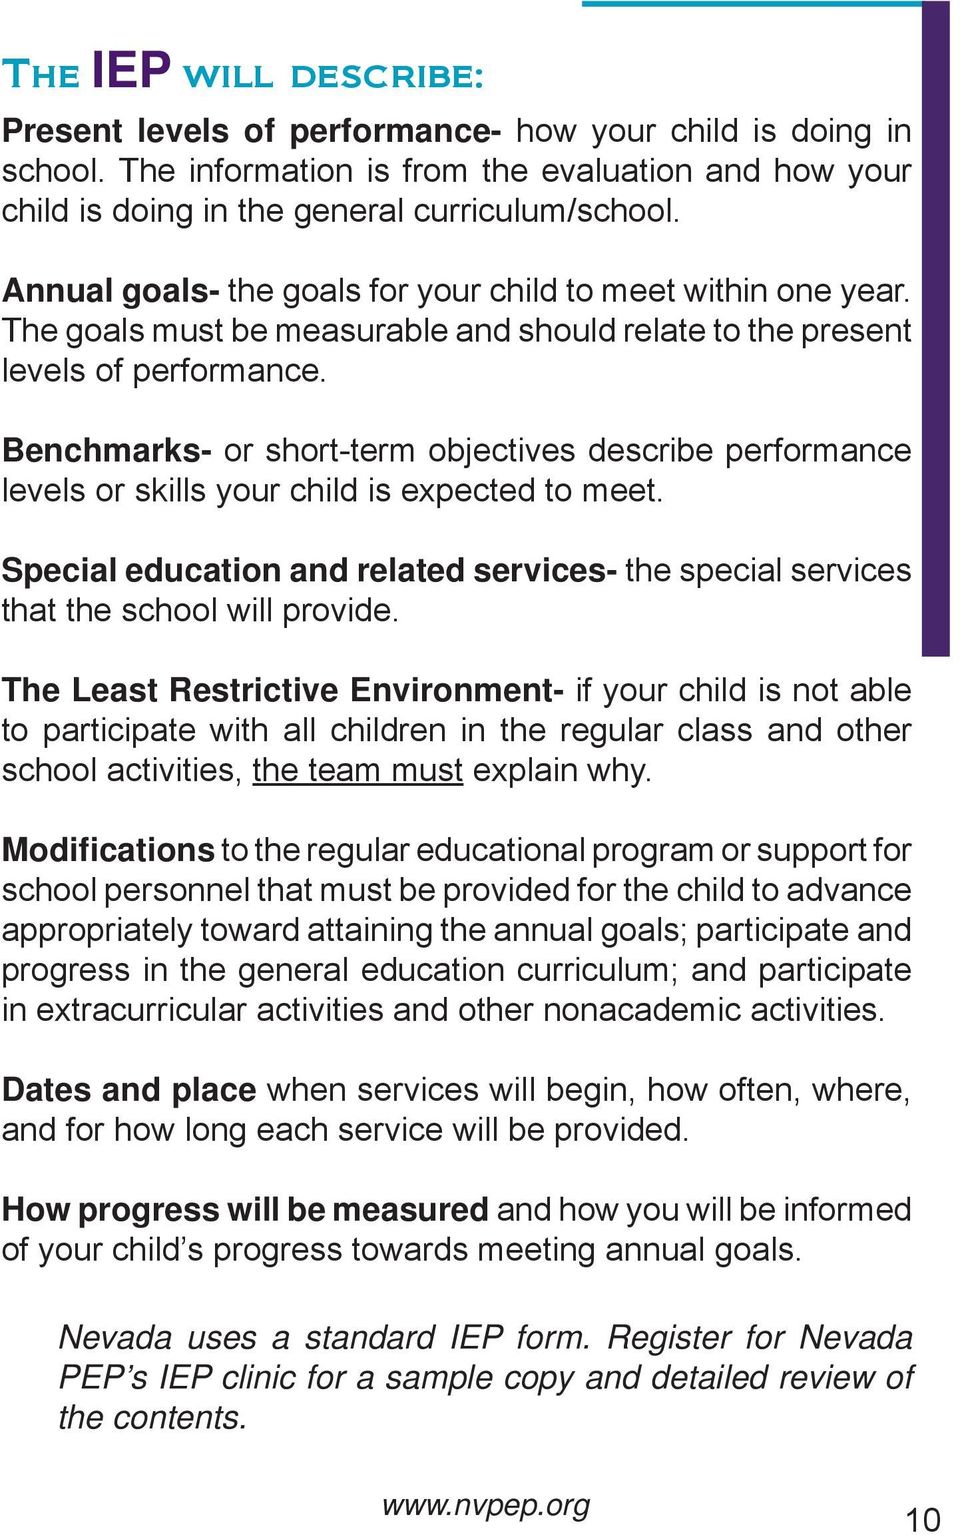 Benchmarks- or short-term objectives describe performance levels or skills your child is expected to meet. Special education and related services- the special services that the school will provide.